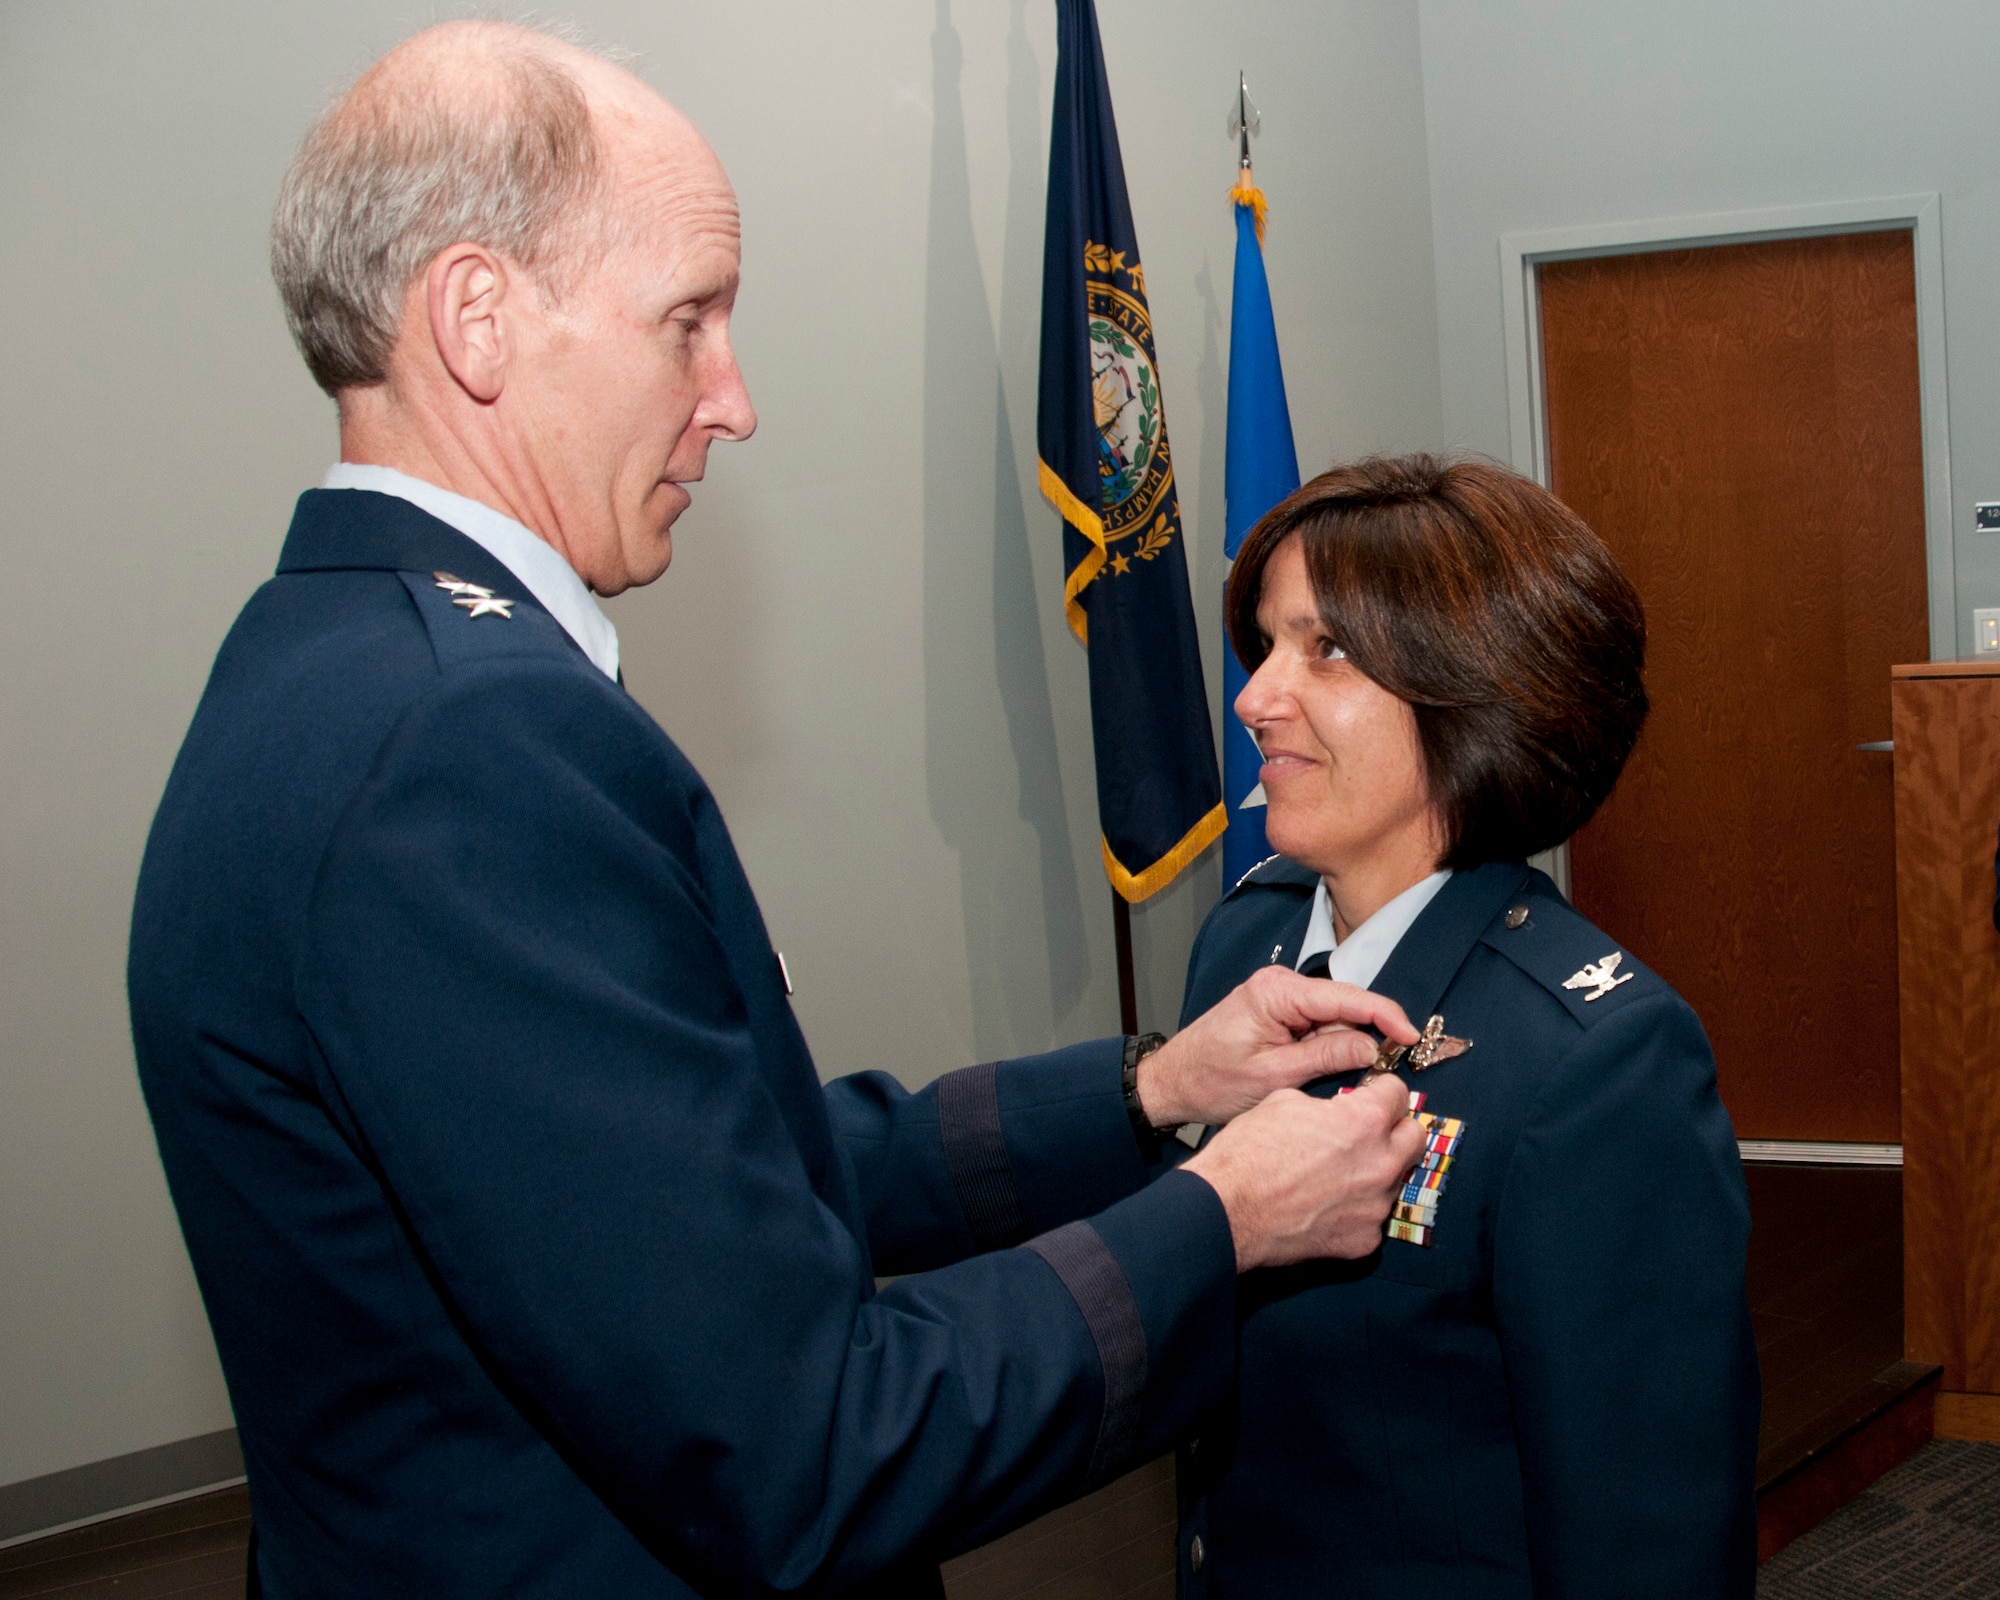 PEASE AIR NATIONAL GUARD BASE, N.H—Maj. Gen.  William N. Reddel III, The Adjutant  General of the New Hampshire National Guard presents Col. Nicole L. Desilets-Bixler with  the Legion of Merit during her retirement ceremony in building 264, on June 8, 2014. Bixler retires after 34 years of service and she has  the distinction of being on the first N.H. Guard all-female flight crew which flew veterans to the Woman's memorial in Washington D.C.  for its dedication. (U.S. Air National Guard photo by Staff Sgt. Curtis J. Lenz)